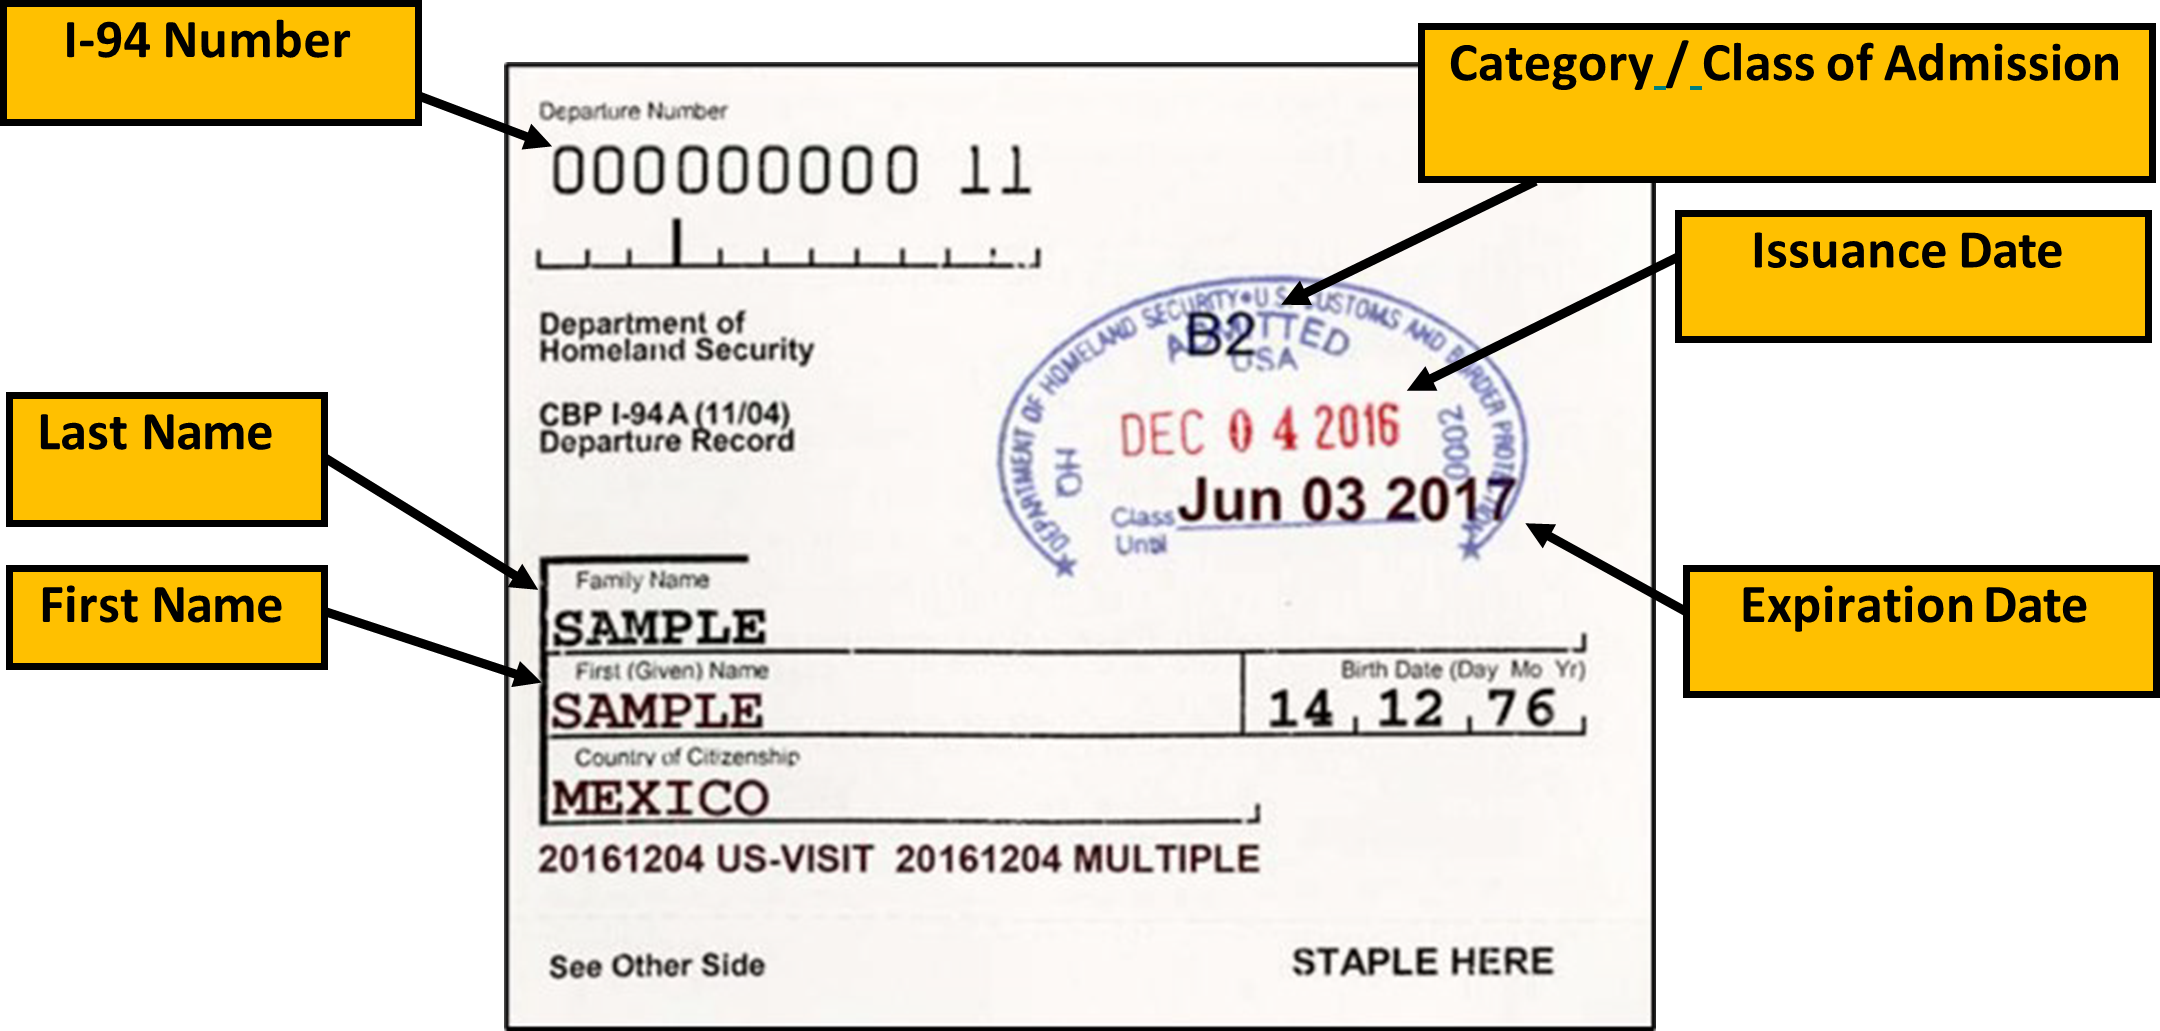 I-94 Issued by CBP